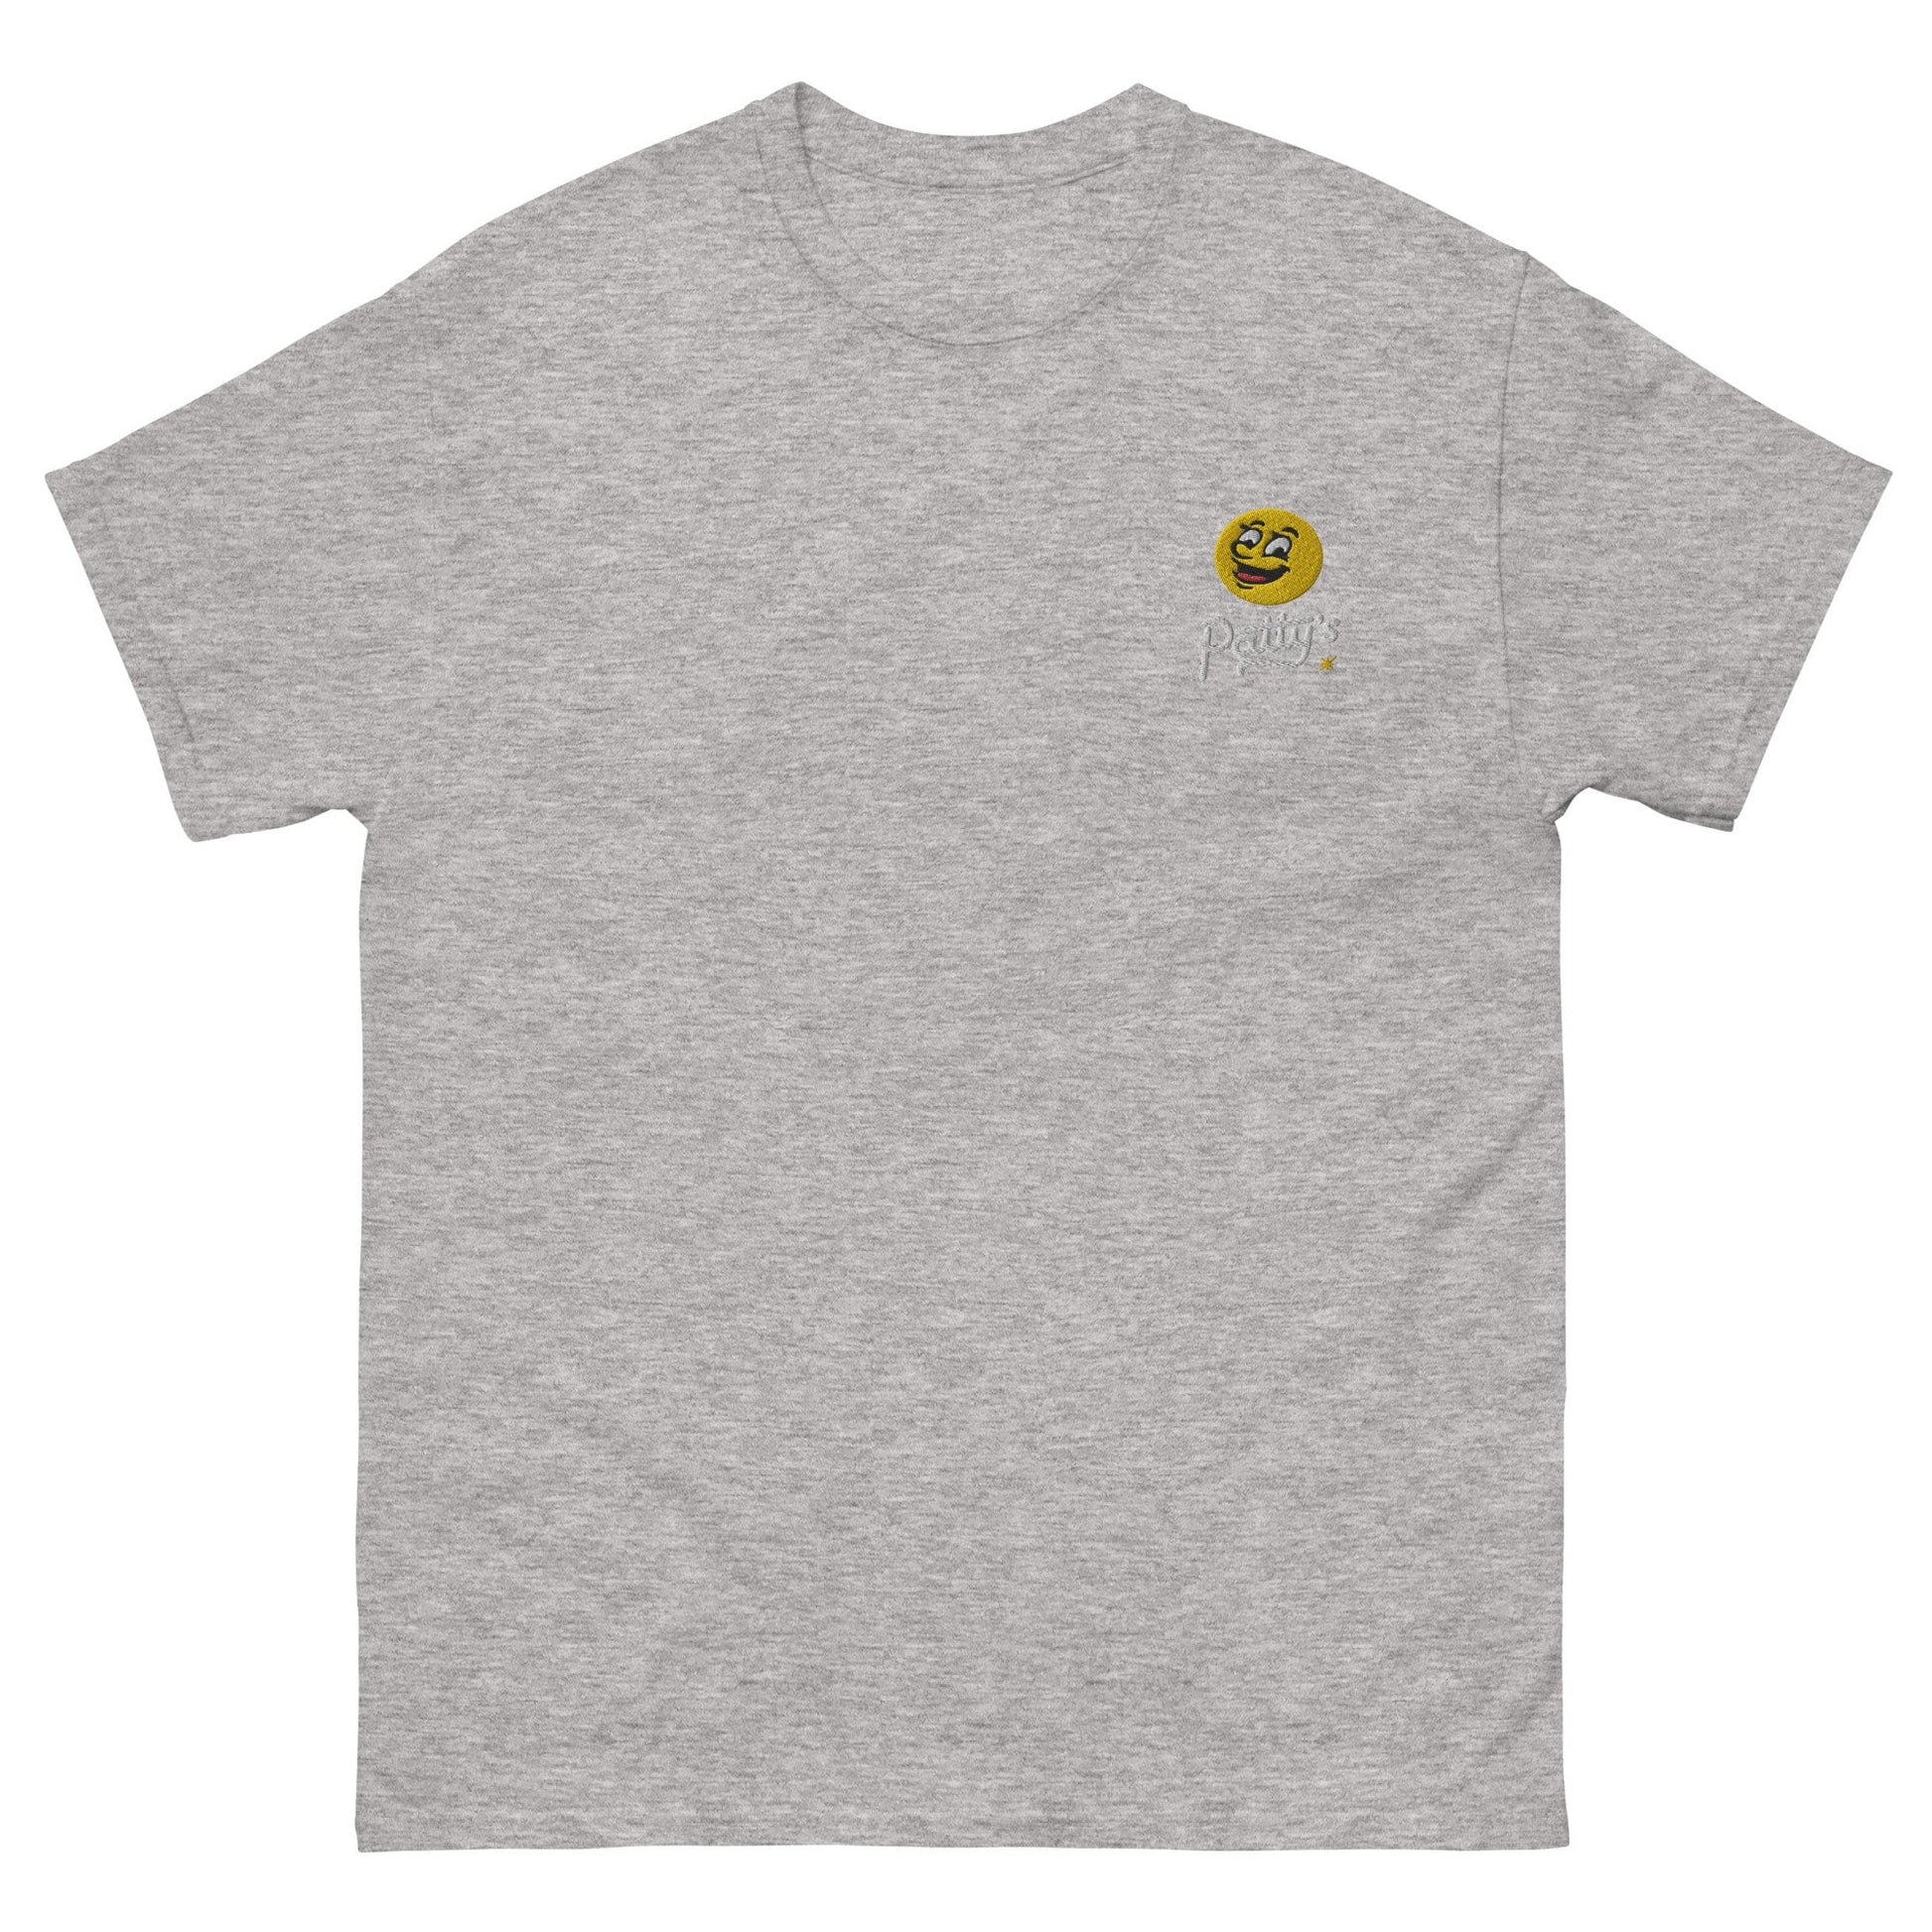 Patty&#39;s Service Station Shirt - The Gentlemen TV Show Inspired Merch - Embroidered Cotton Tee - Multiple colors